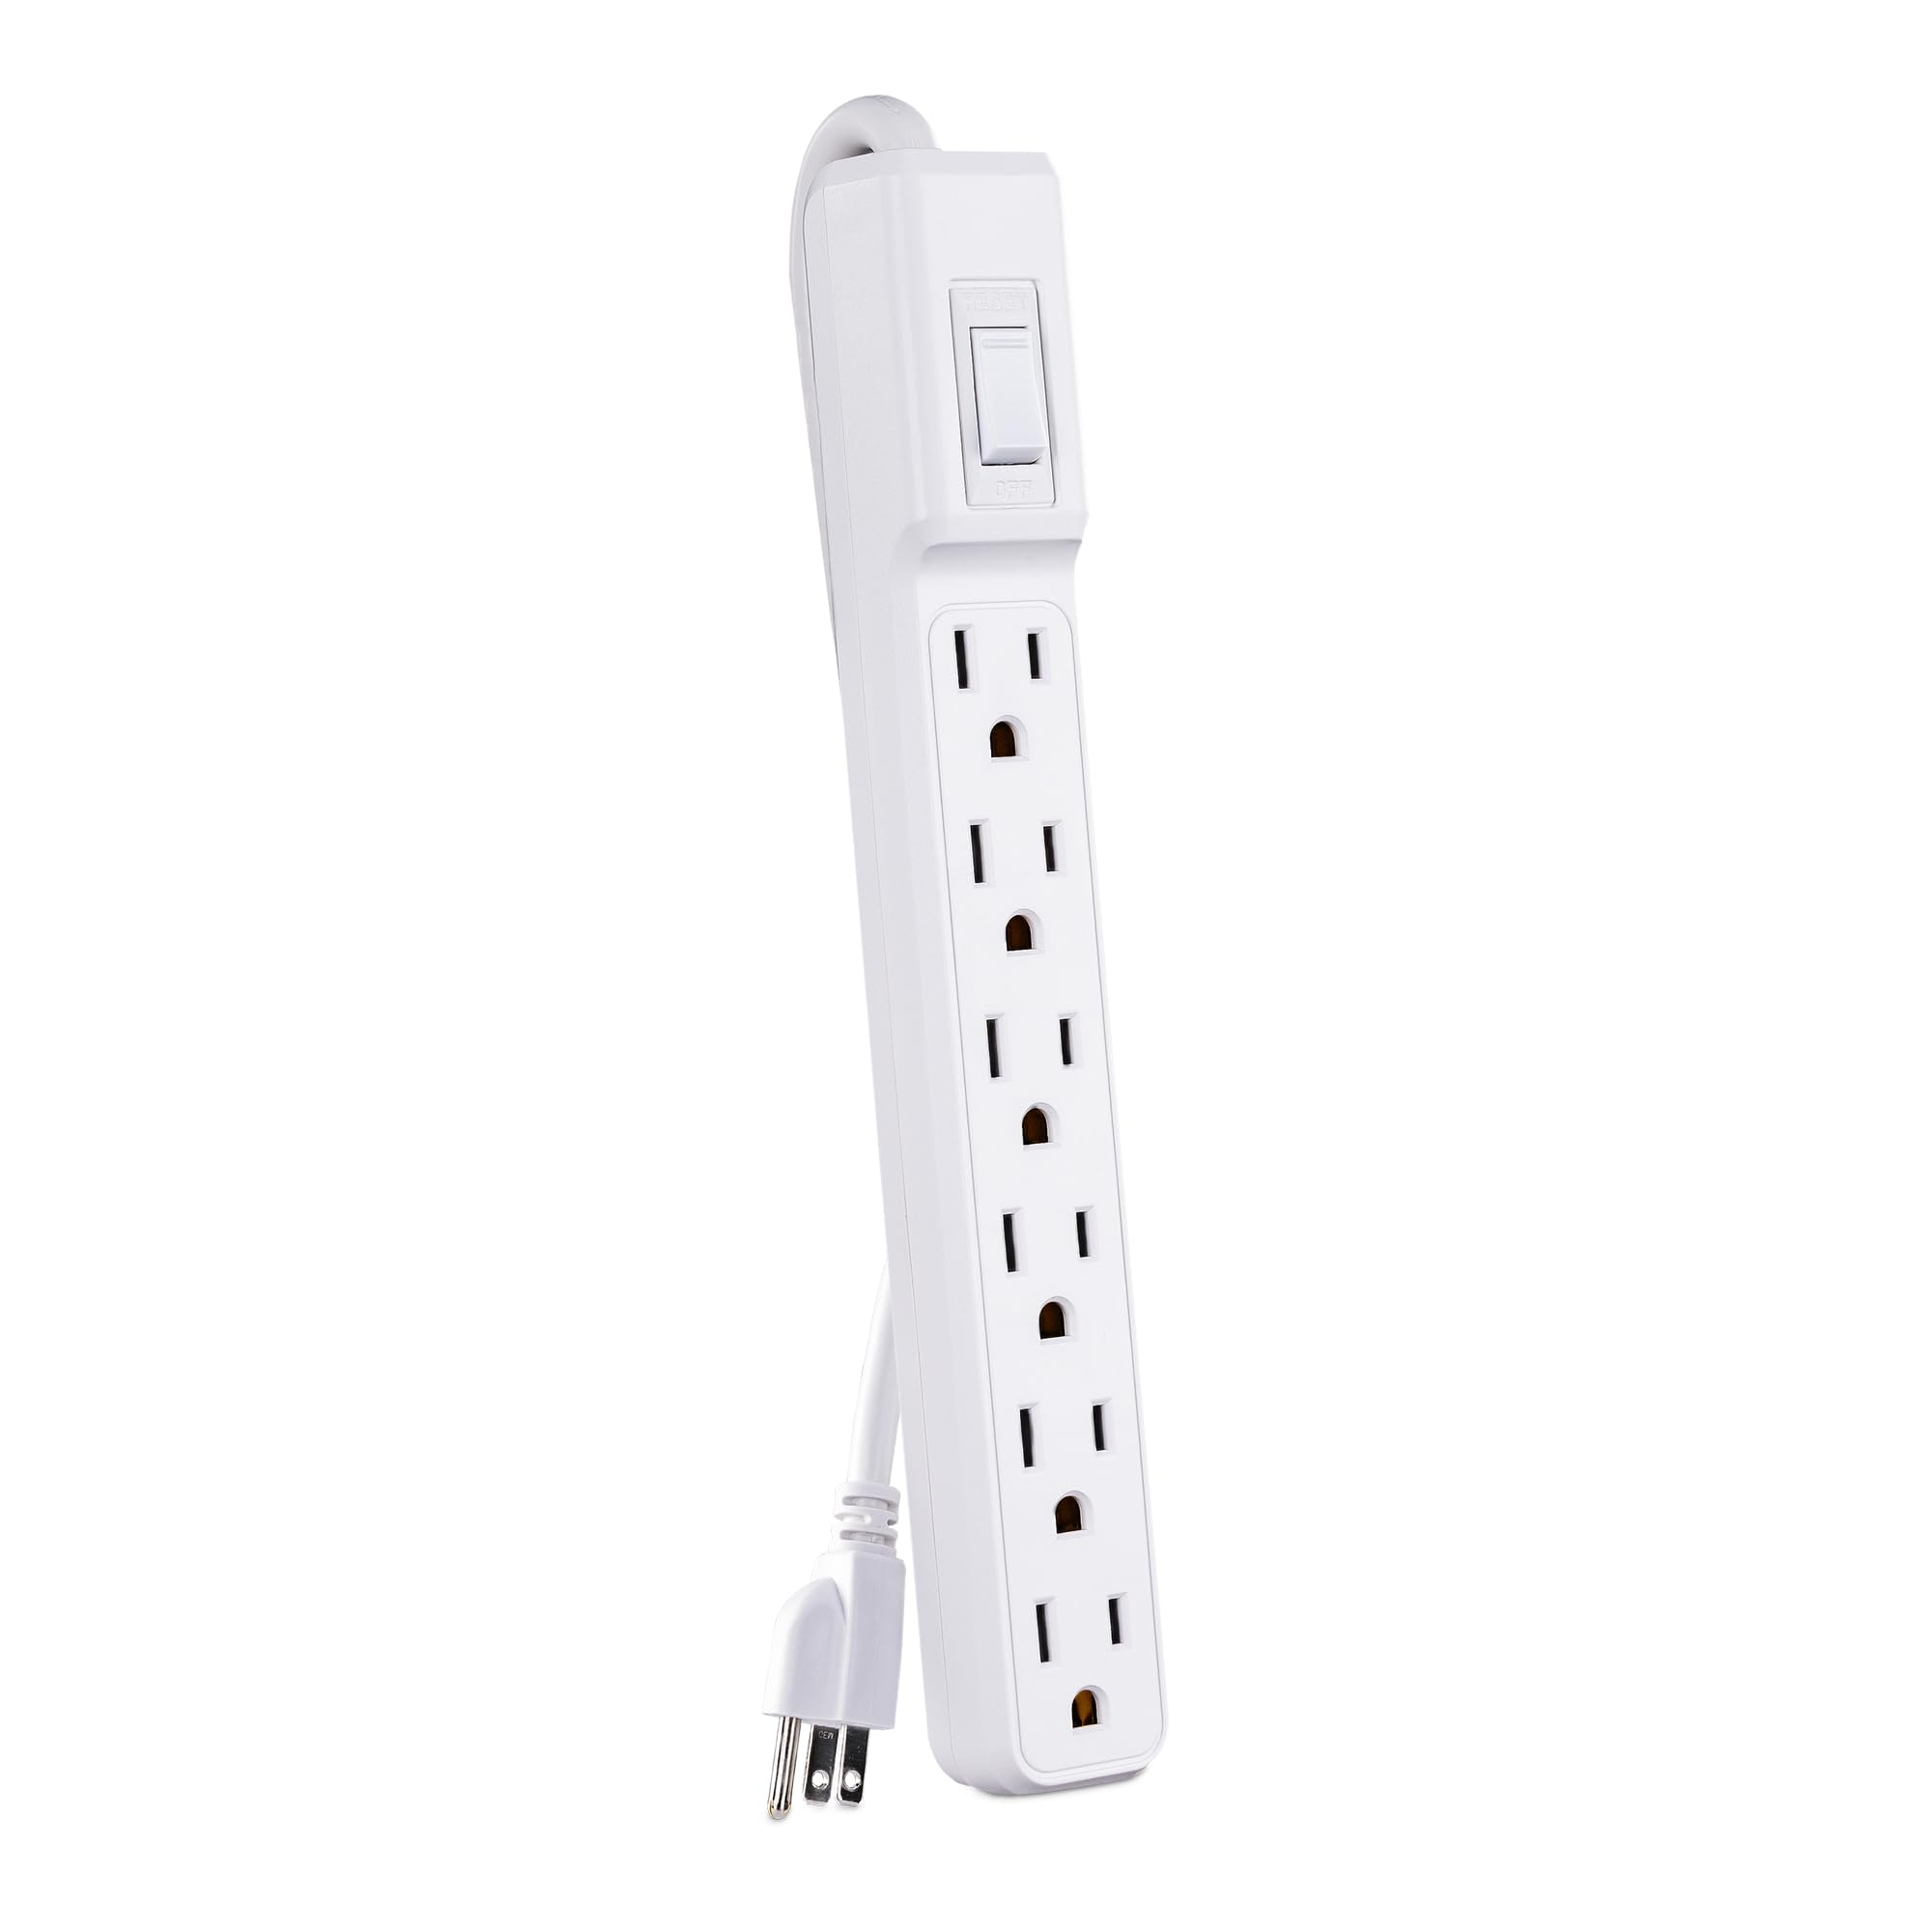 CyberPower MP1044NN Power Strip, 6-Outlets, 2-Foot Cord, Multi Pack, White